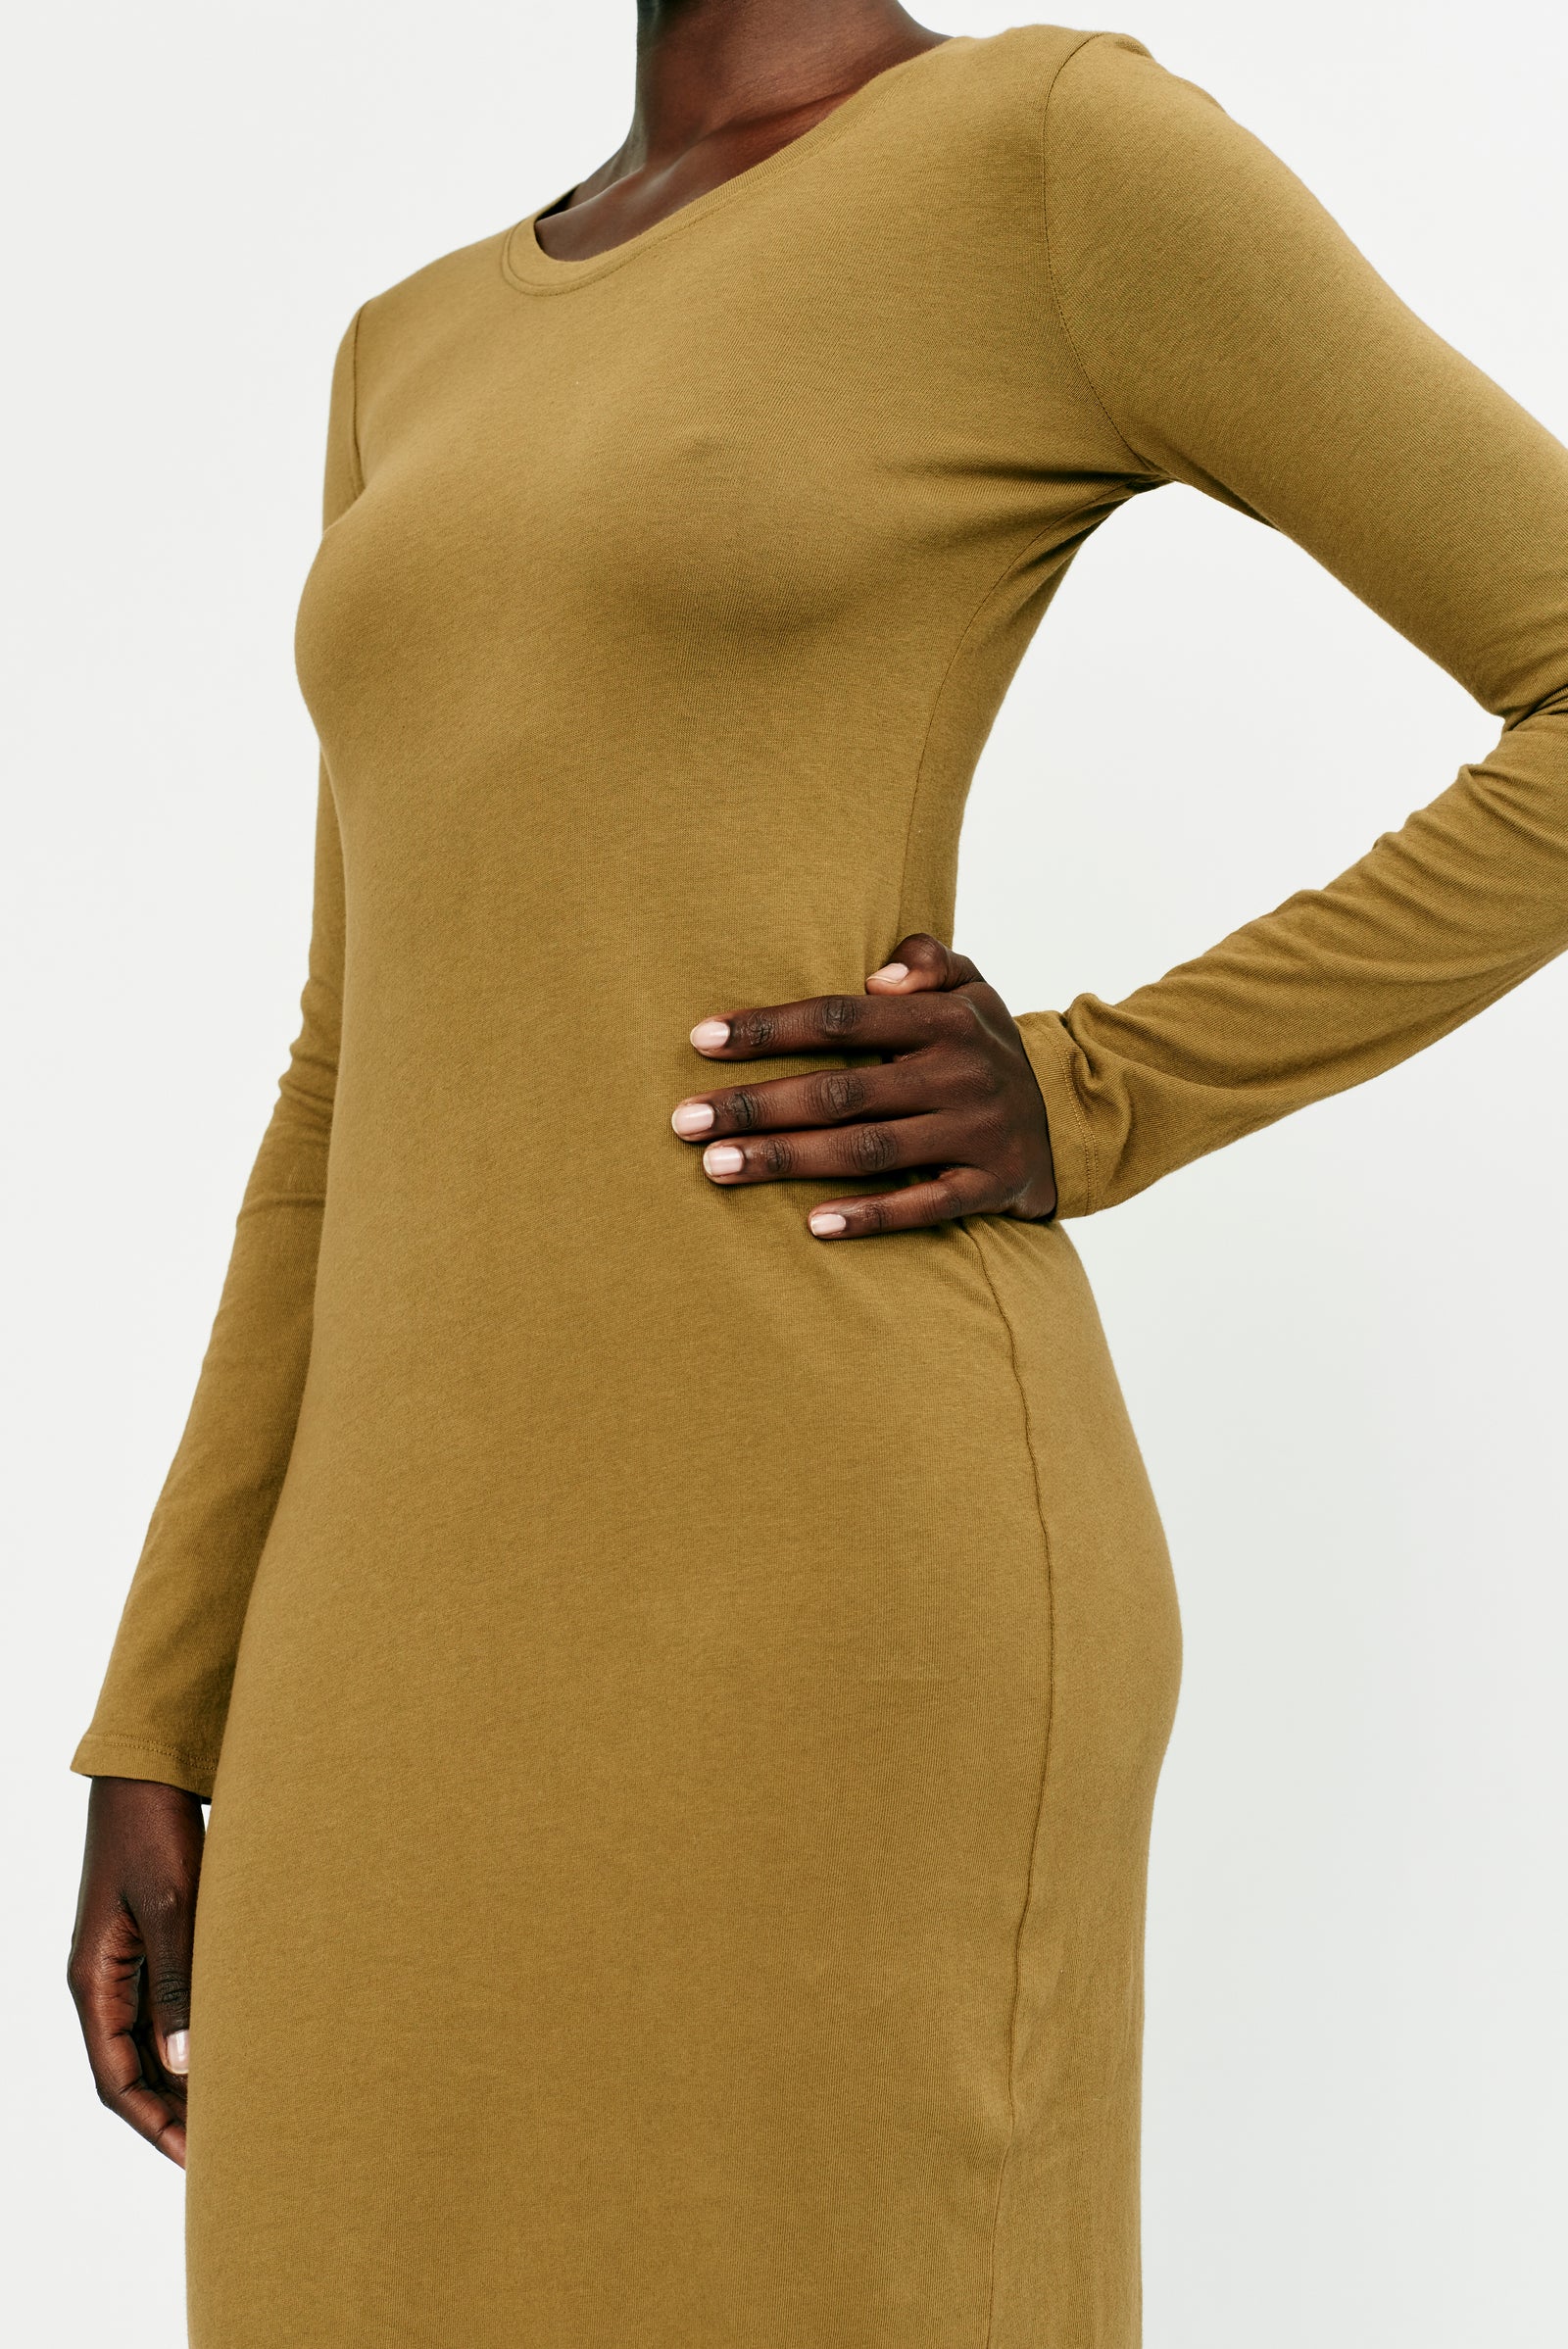 Tobacco Classic Jersey Fitted Long Sleeve Dress Side Close-Up View